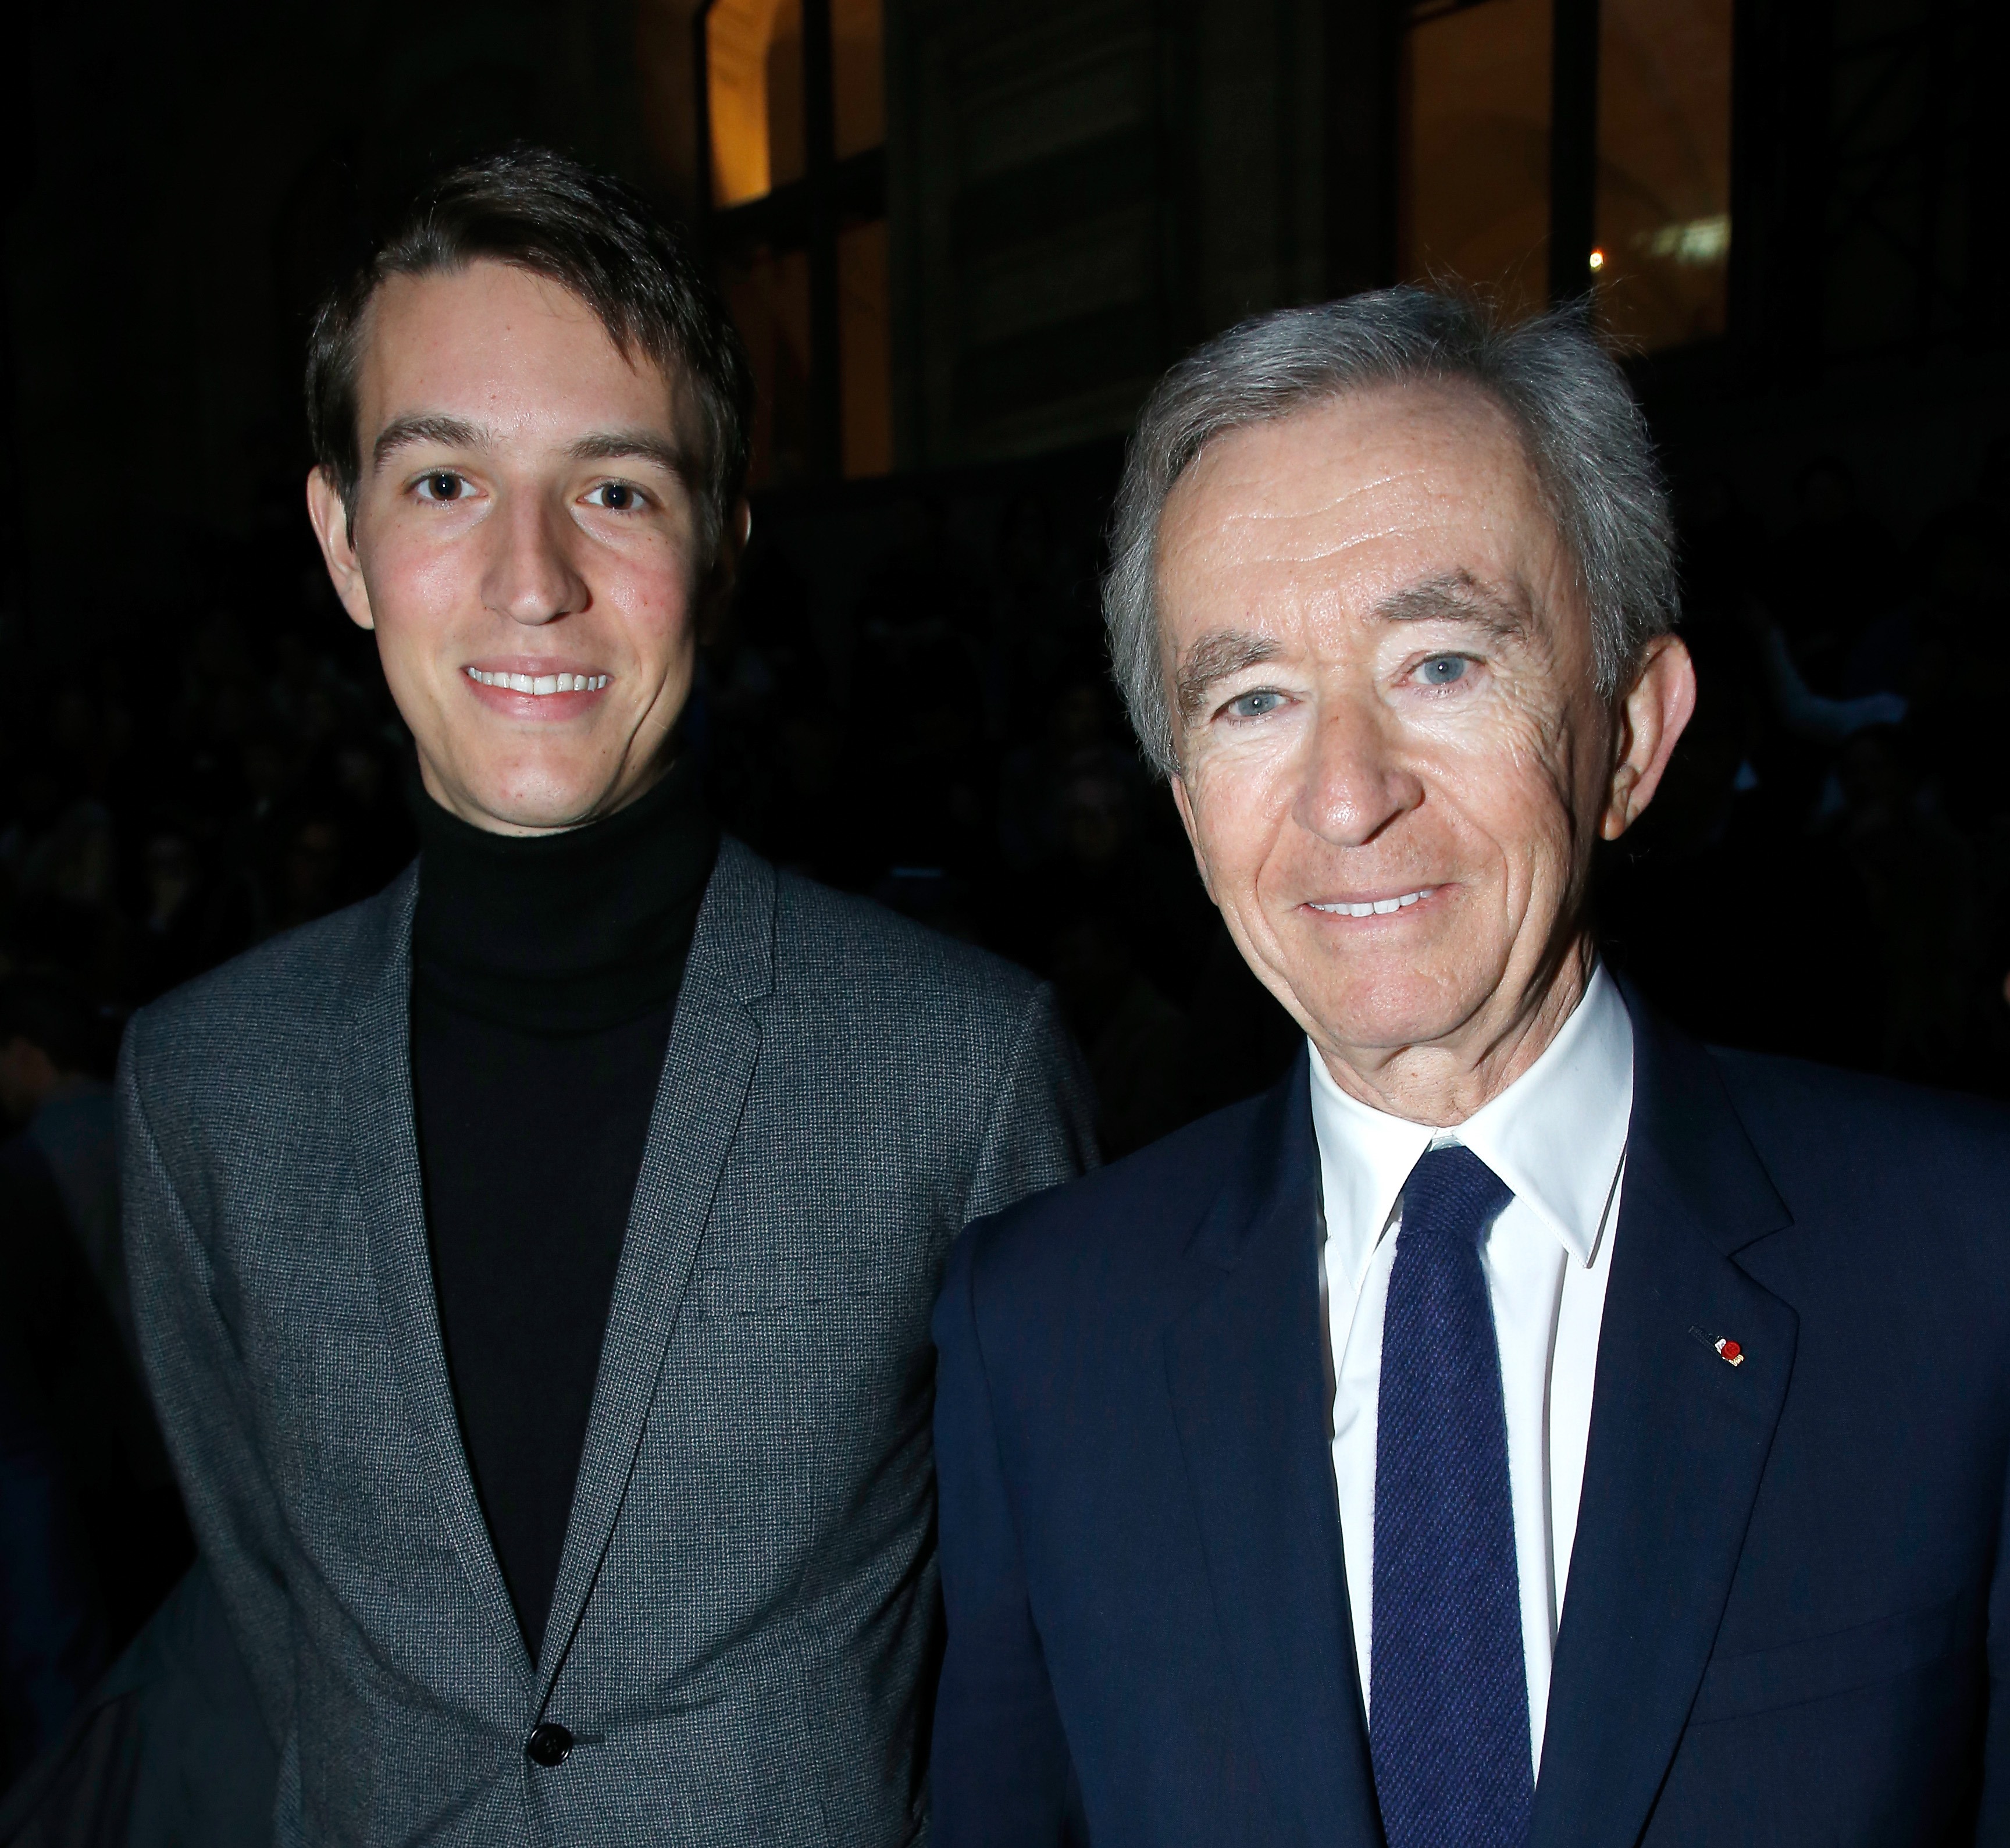 Alexandre Arnault, 29, son of LVMH founder Bertrand, is the man who helped  score Beyoncé campaign